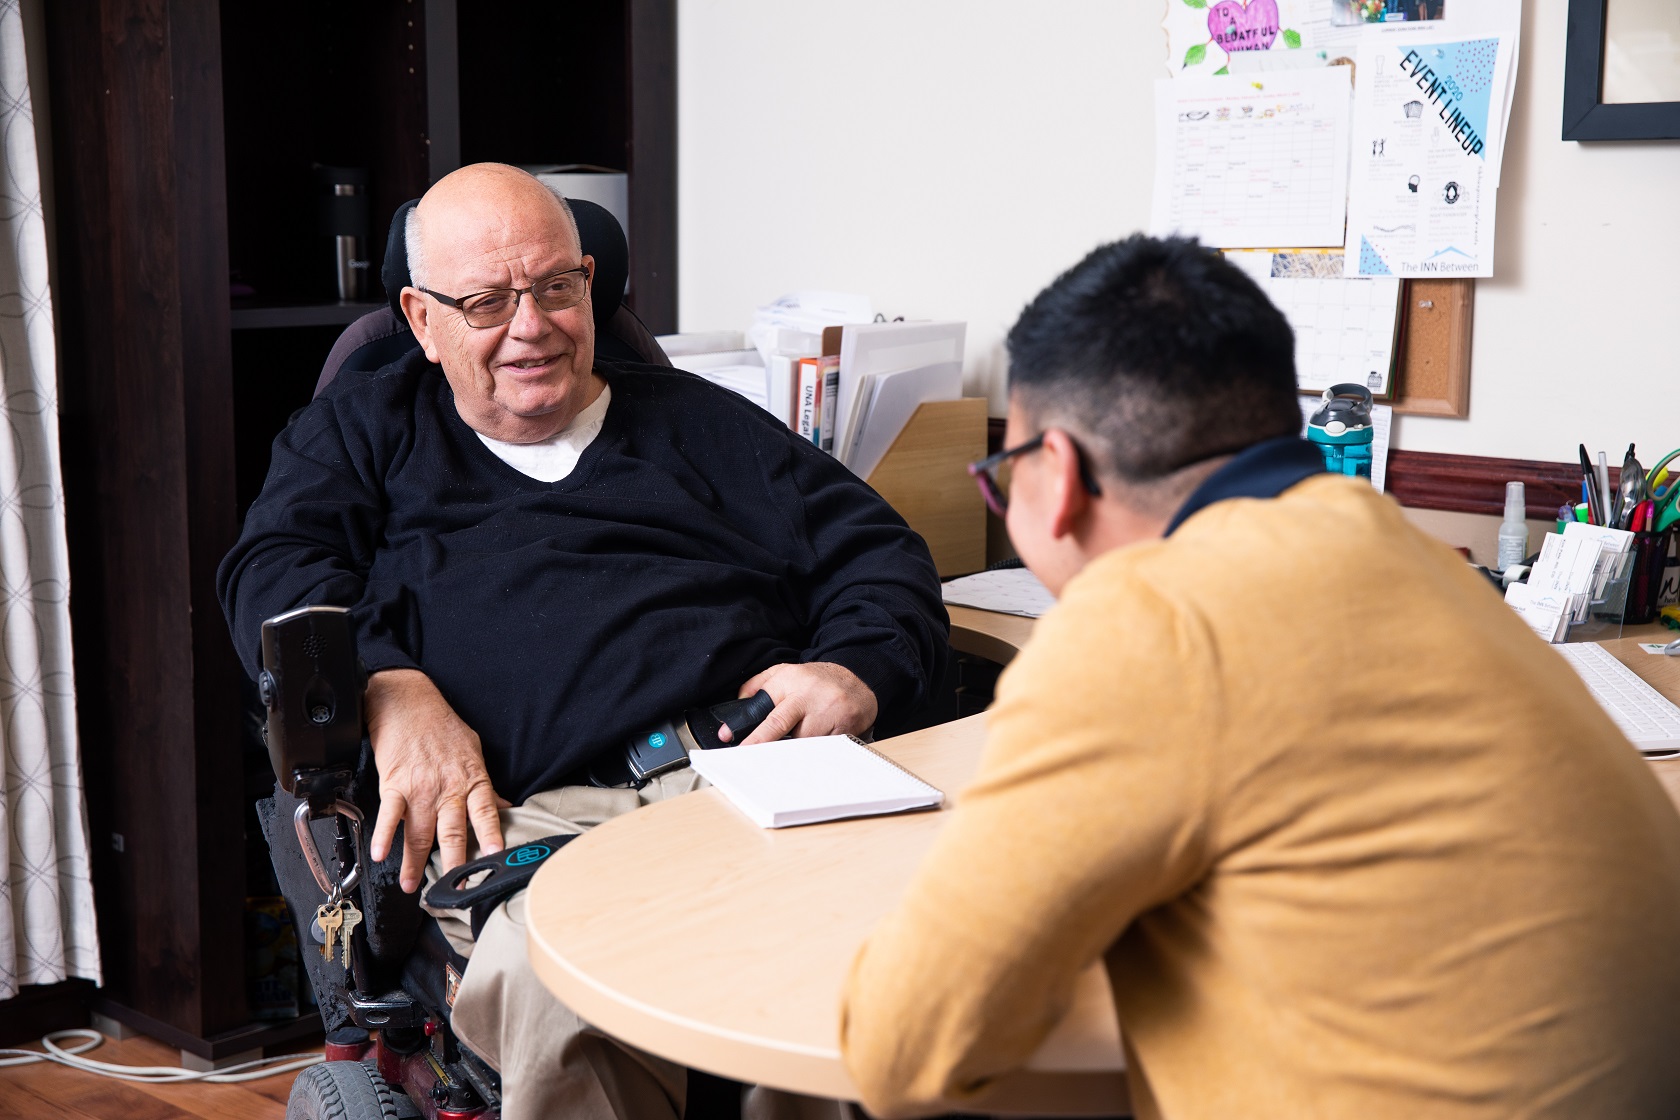 An elderly man in a wheelchair sitting at a desk with another man